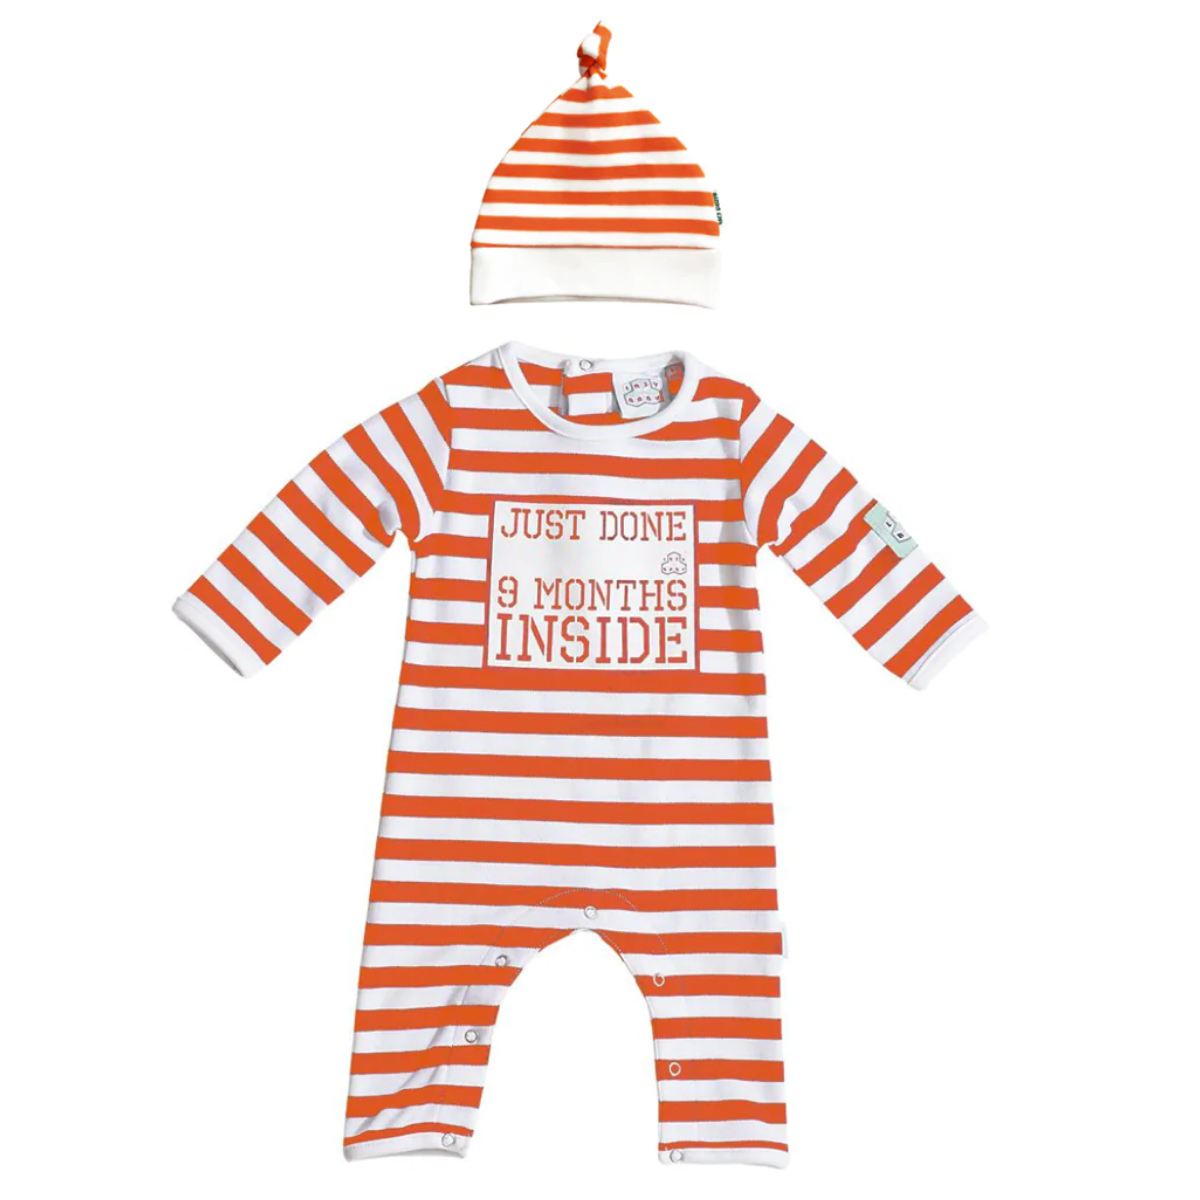 Just Done 9 Months Inside slogan baby grow and hat in orange and white stripes